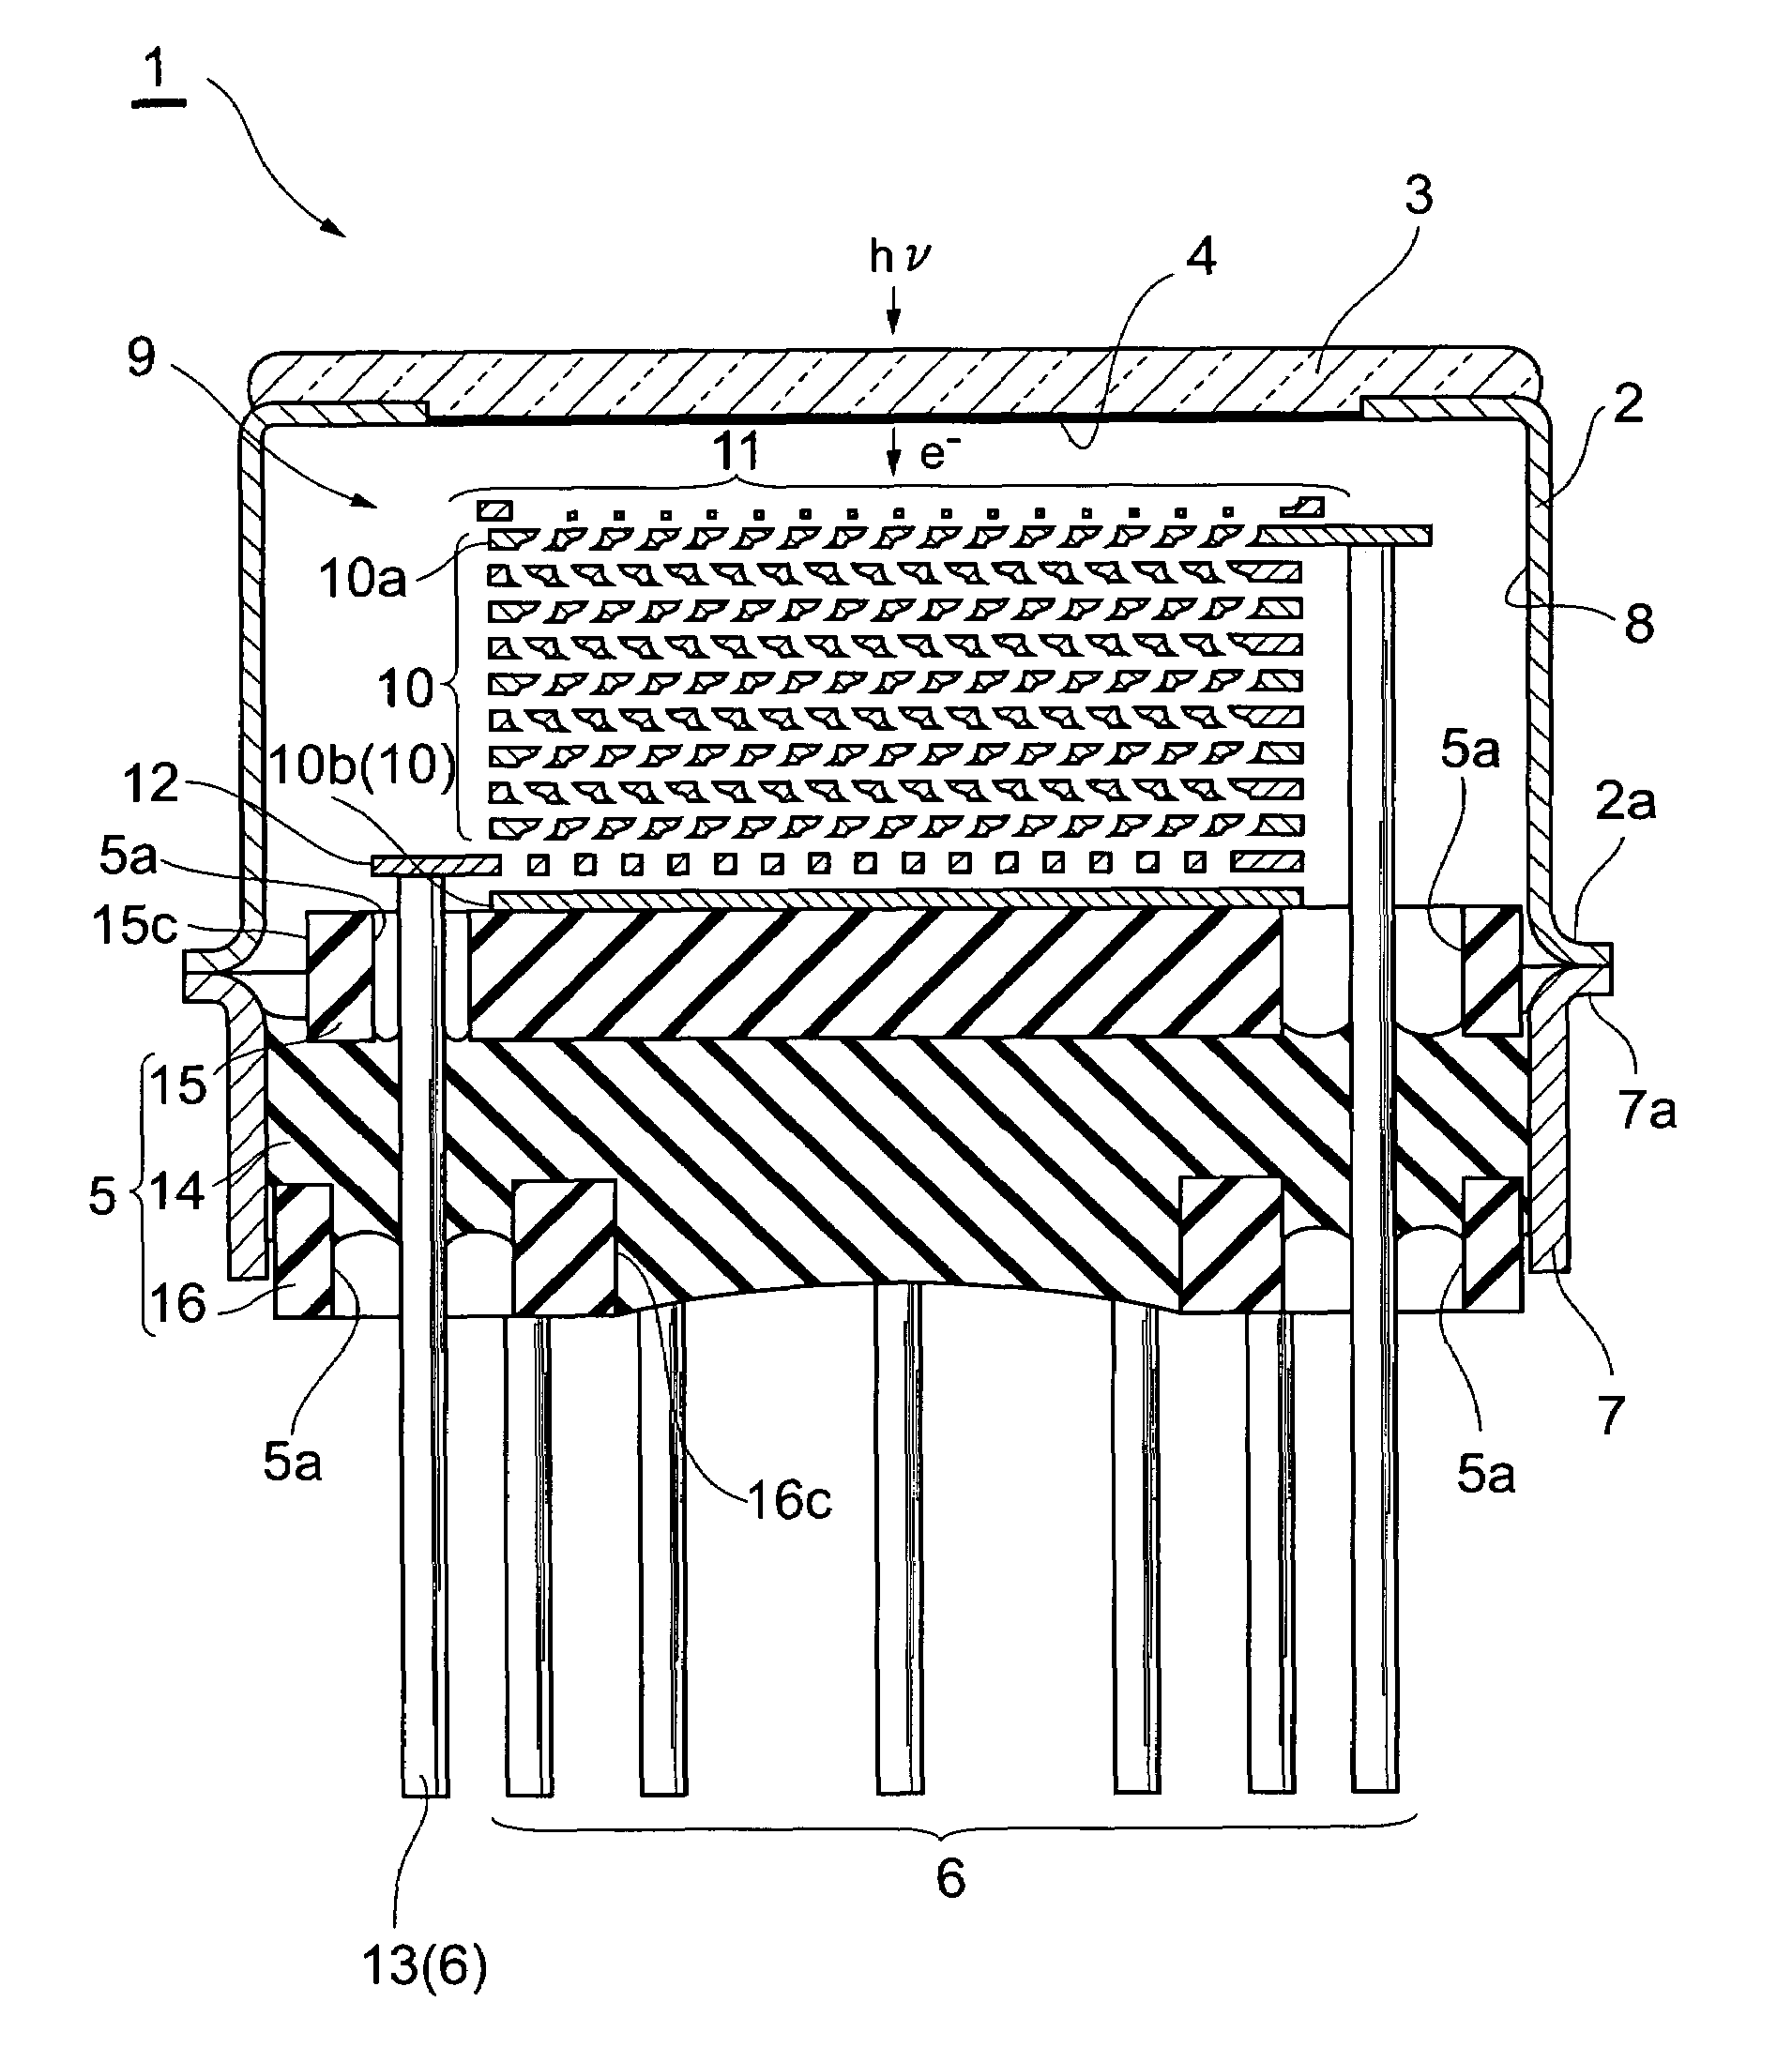 Photomultiplier with particular stem/pin structure